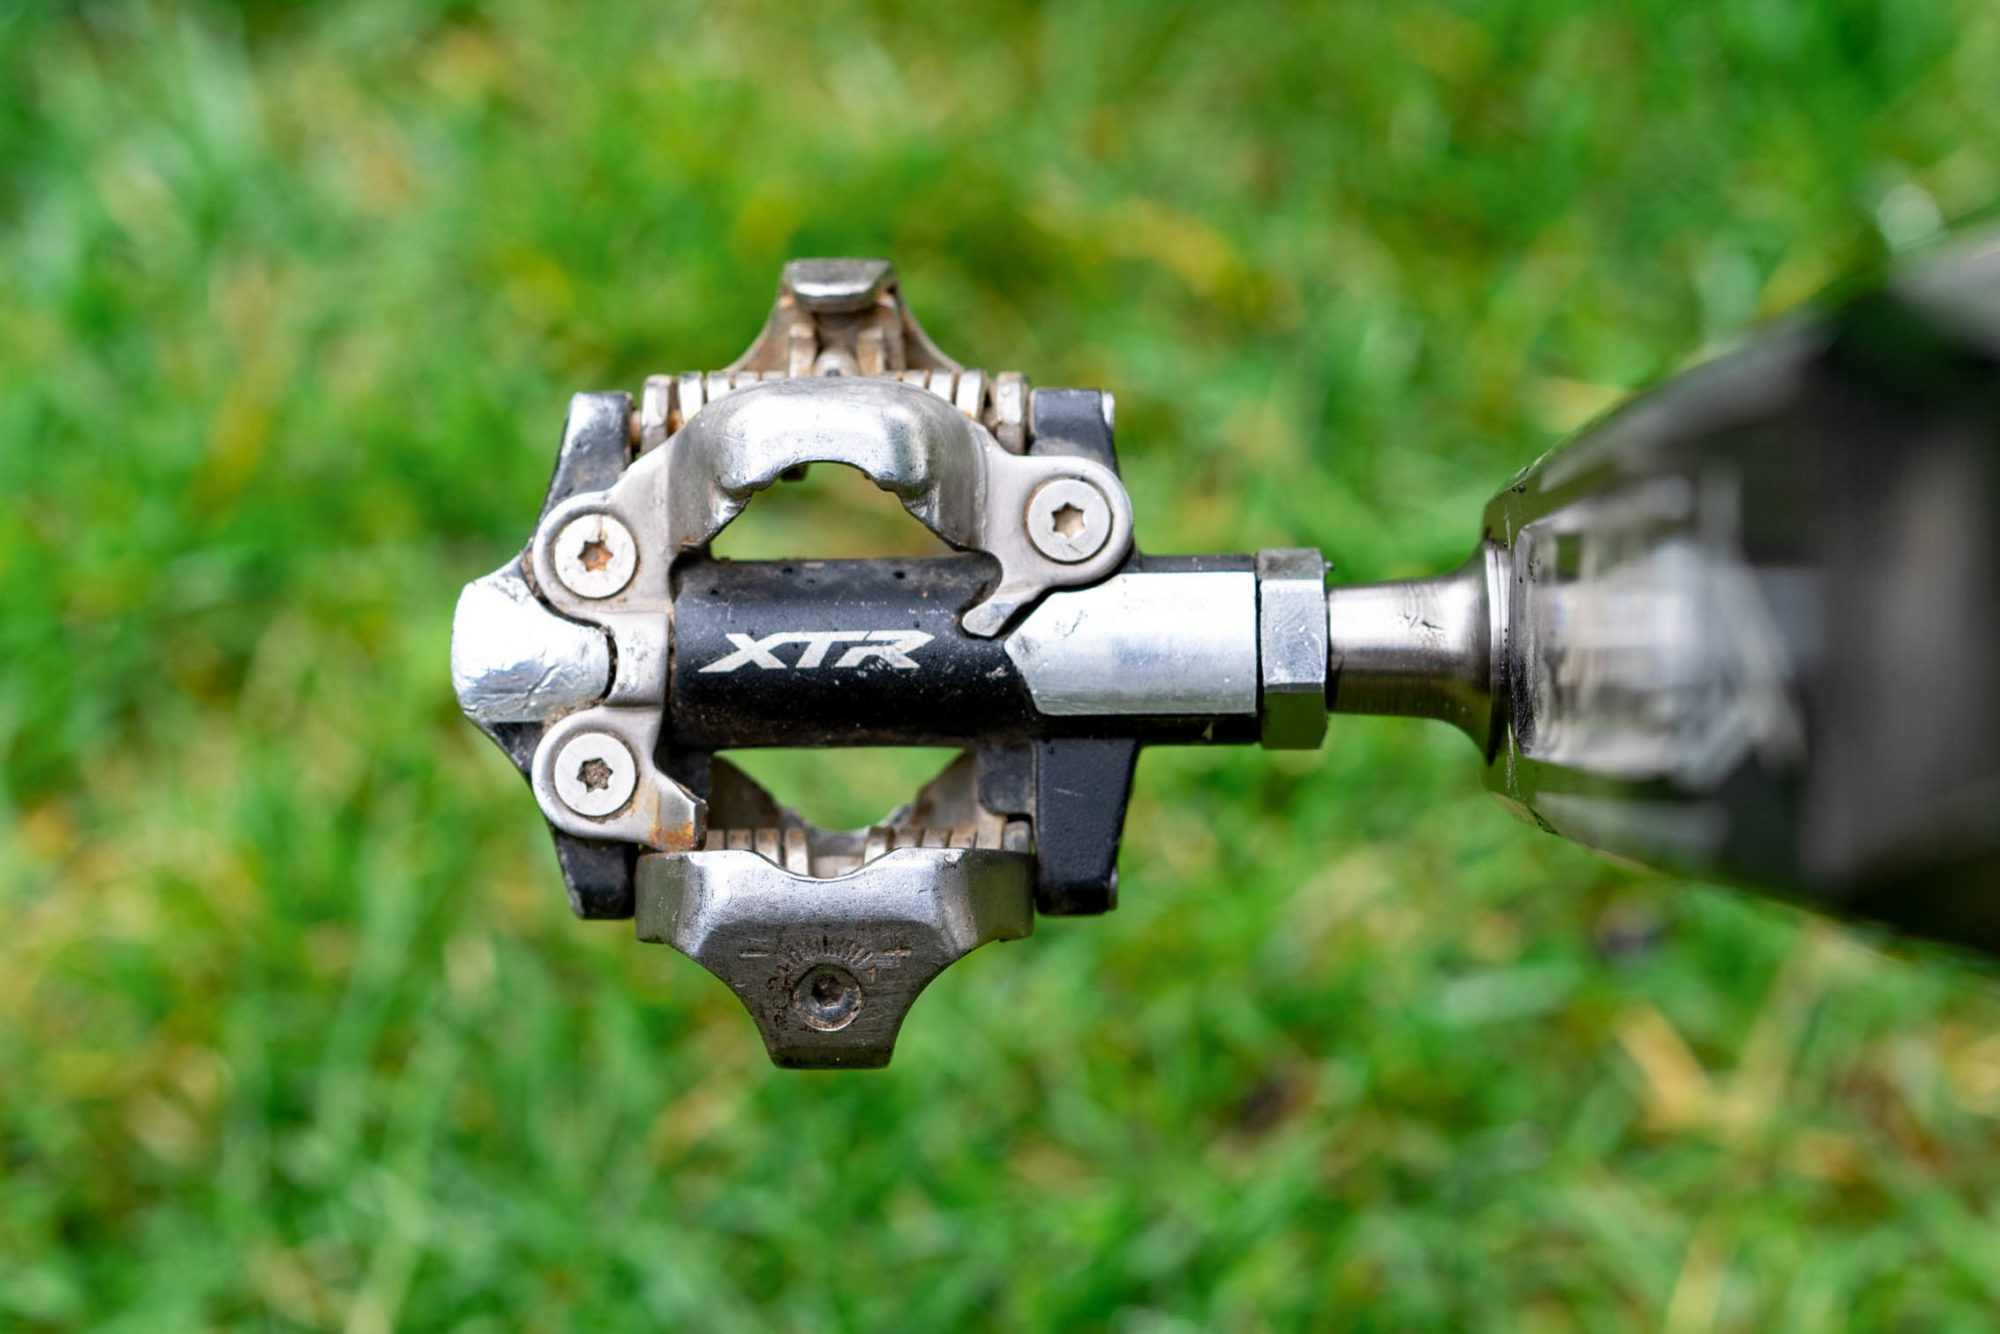 Shimano XTR M9100 Pedals, best pedals for bikepacking